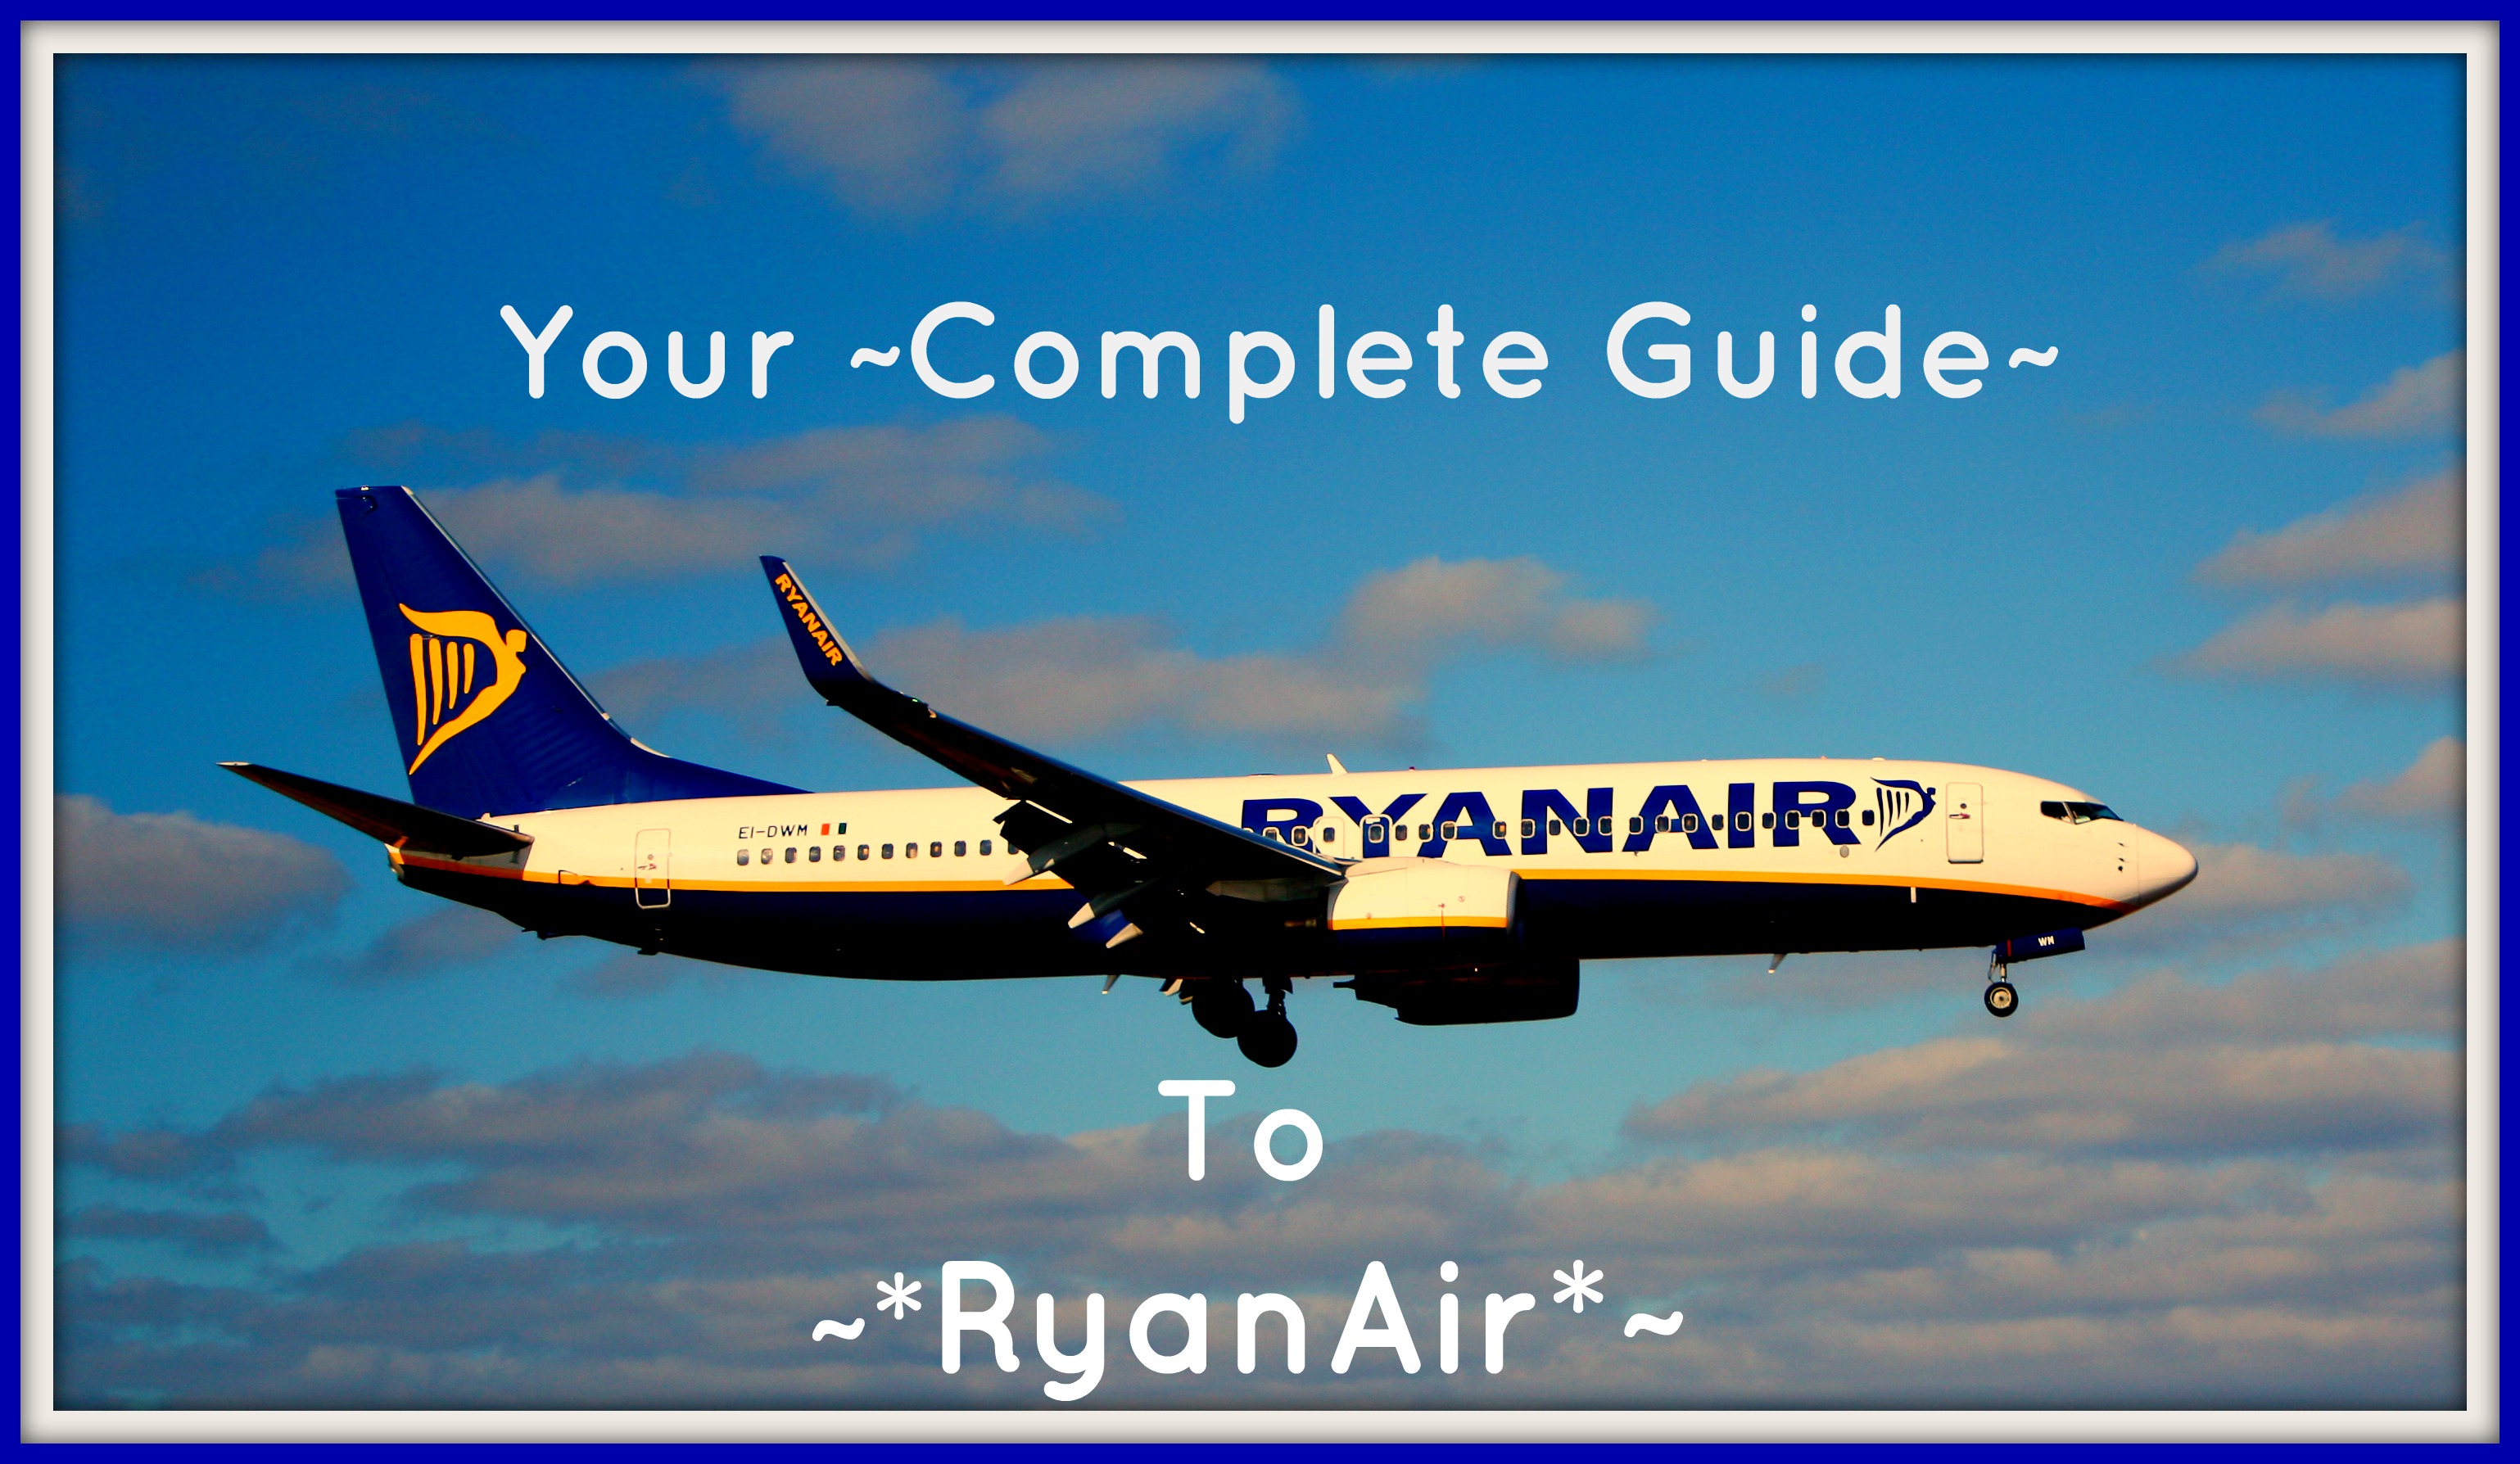 Frequently Asked Questions FAQS for RyanAir